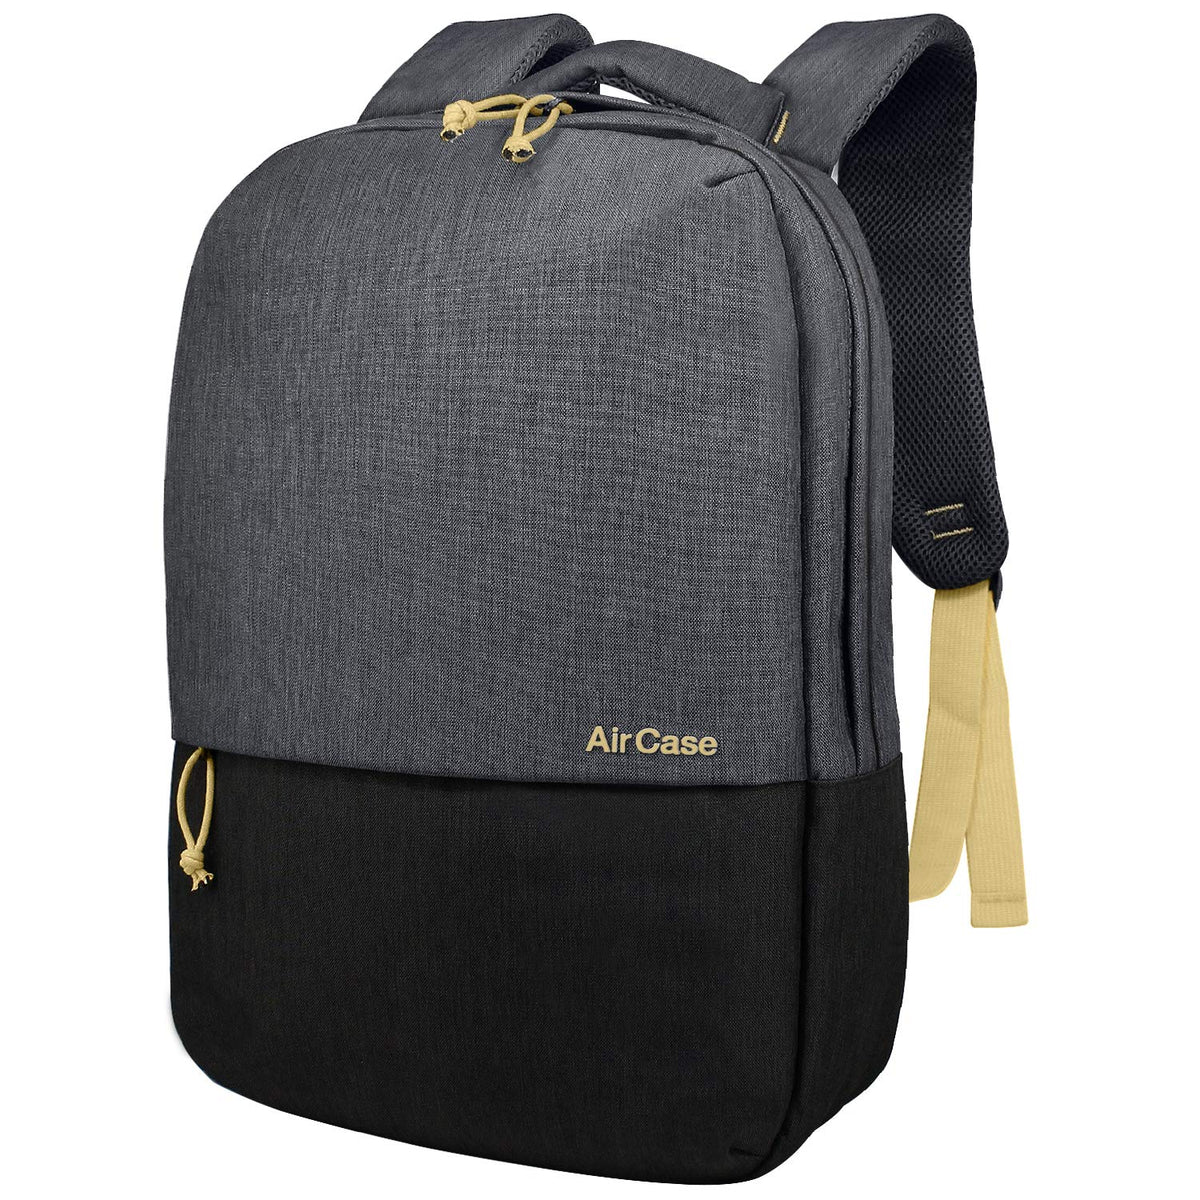 15 Best Back to School Backpacks and Book Bags in Our Collection